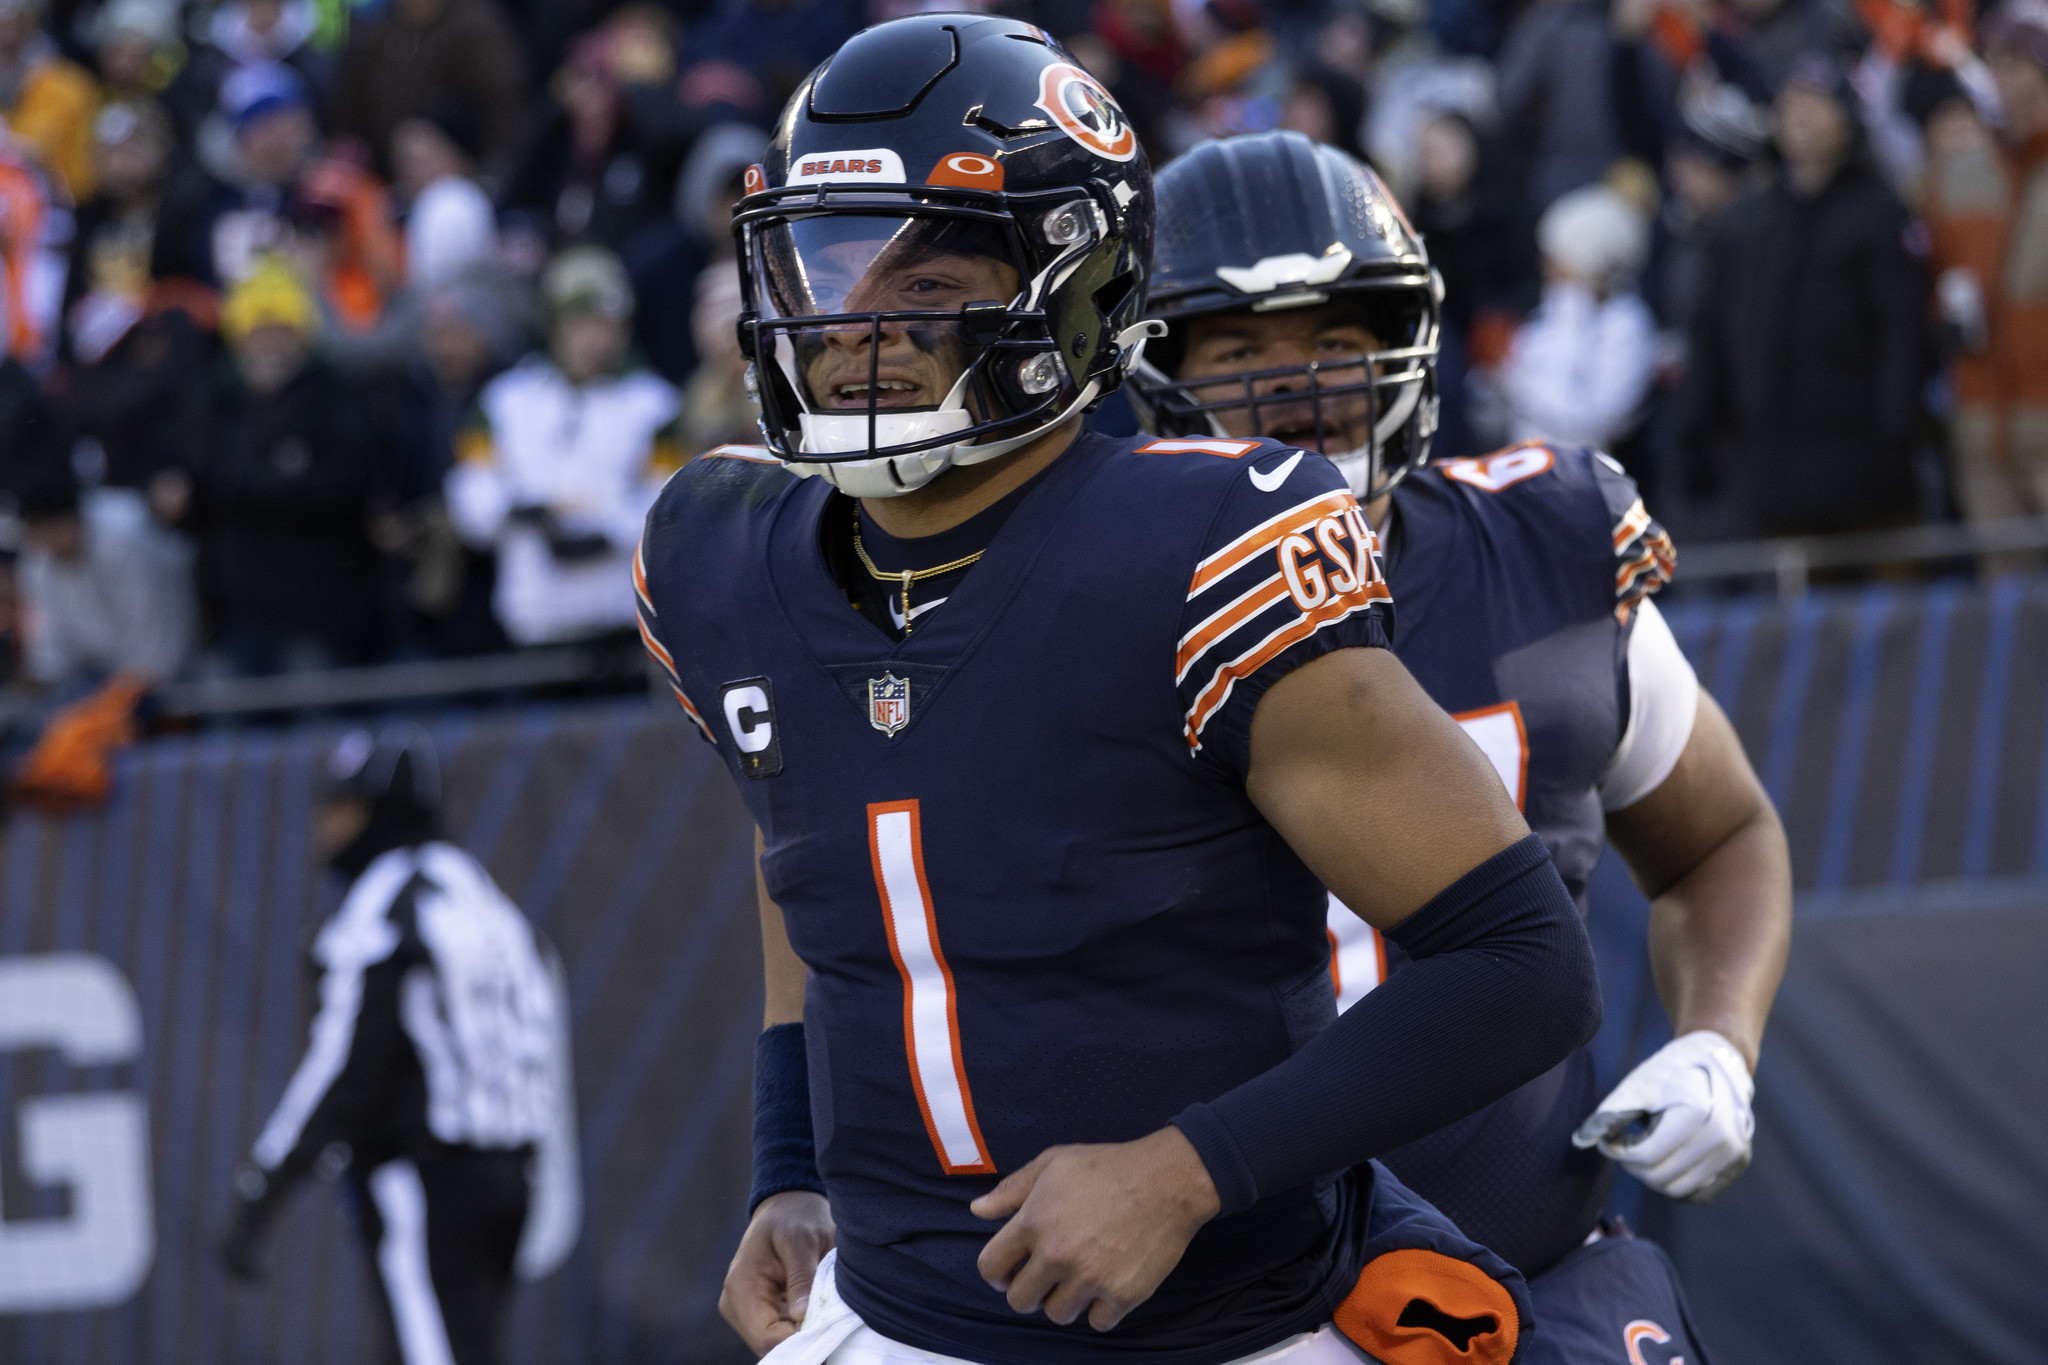 Chicago Bears: No players elected to initial Pro Bowl rosters